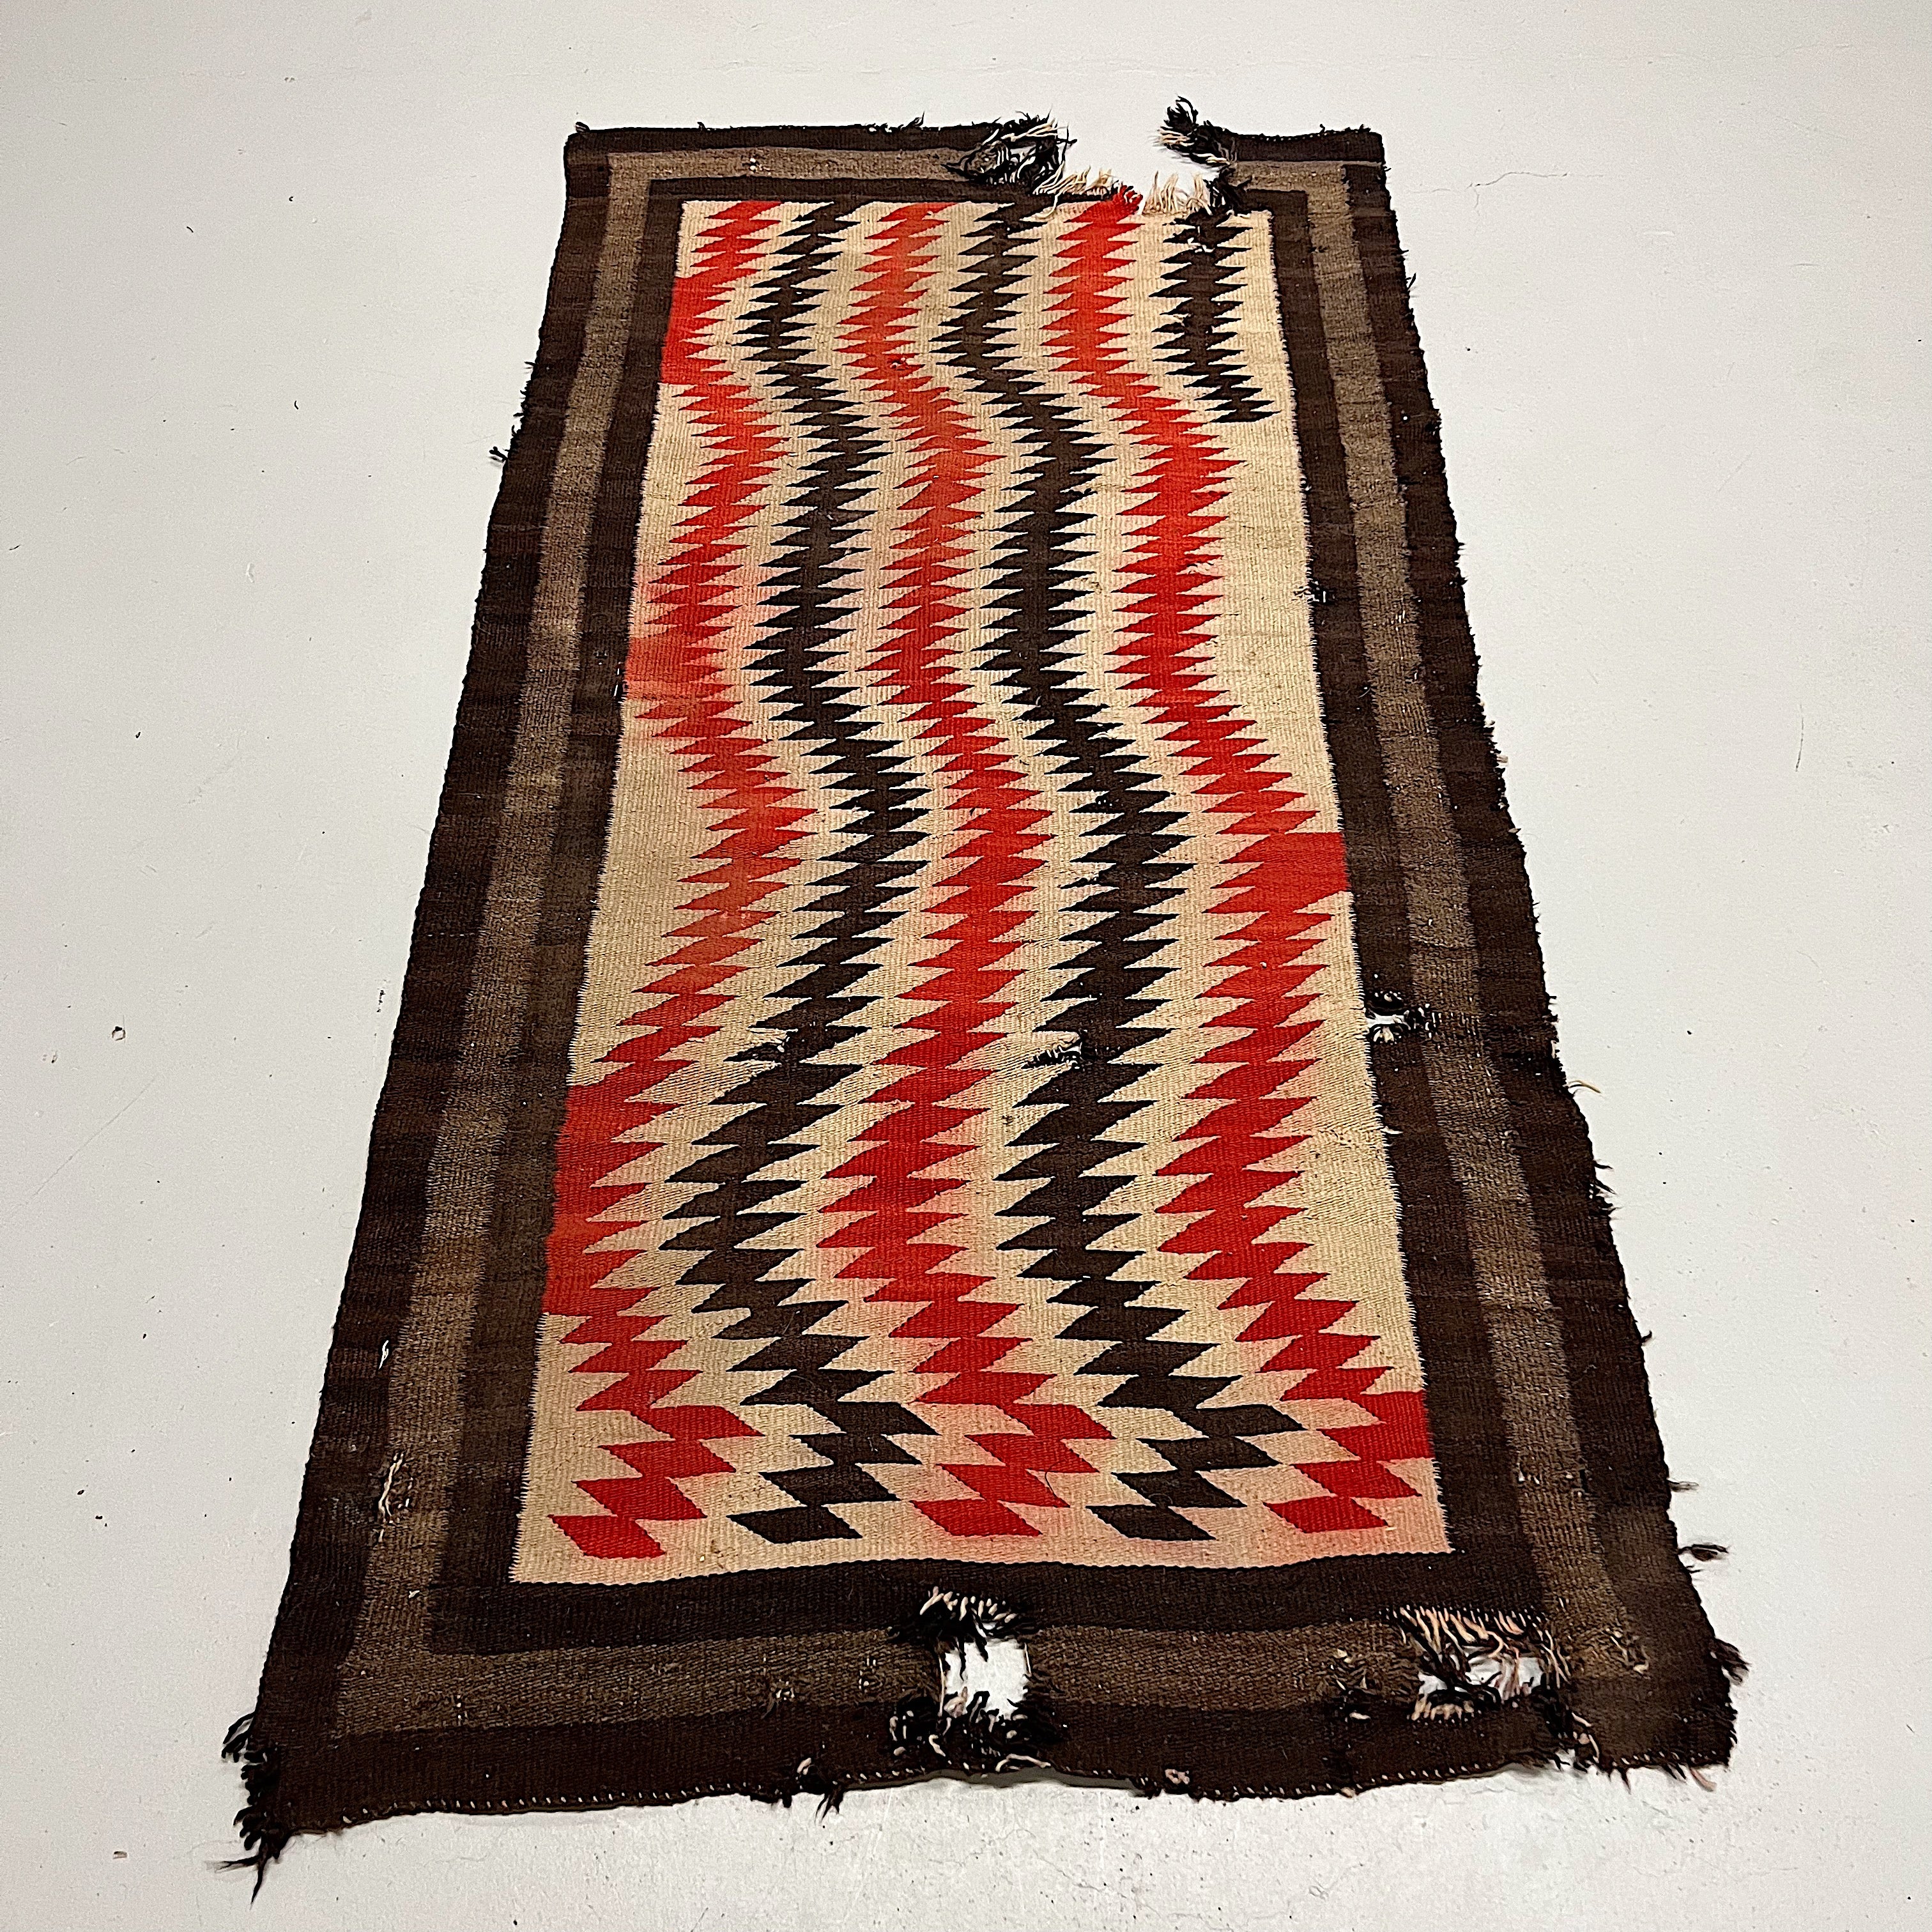 1920s Navajo Rug with Eye Dazzler Pattern - Antique Southwest Blanket - AS IS - Wall Hanger - 81" x 41" - Zig Zag Color Designs